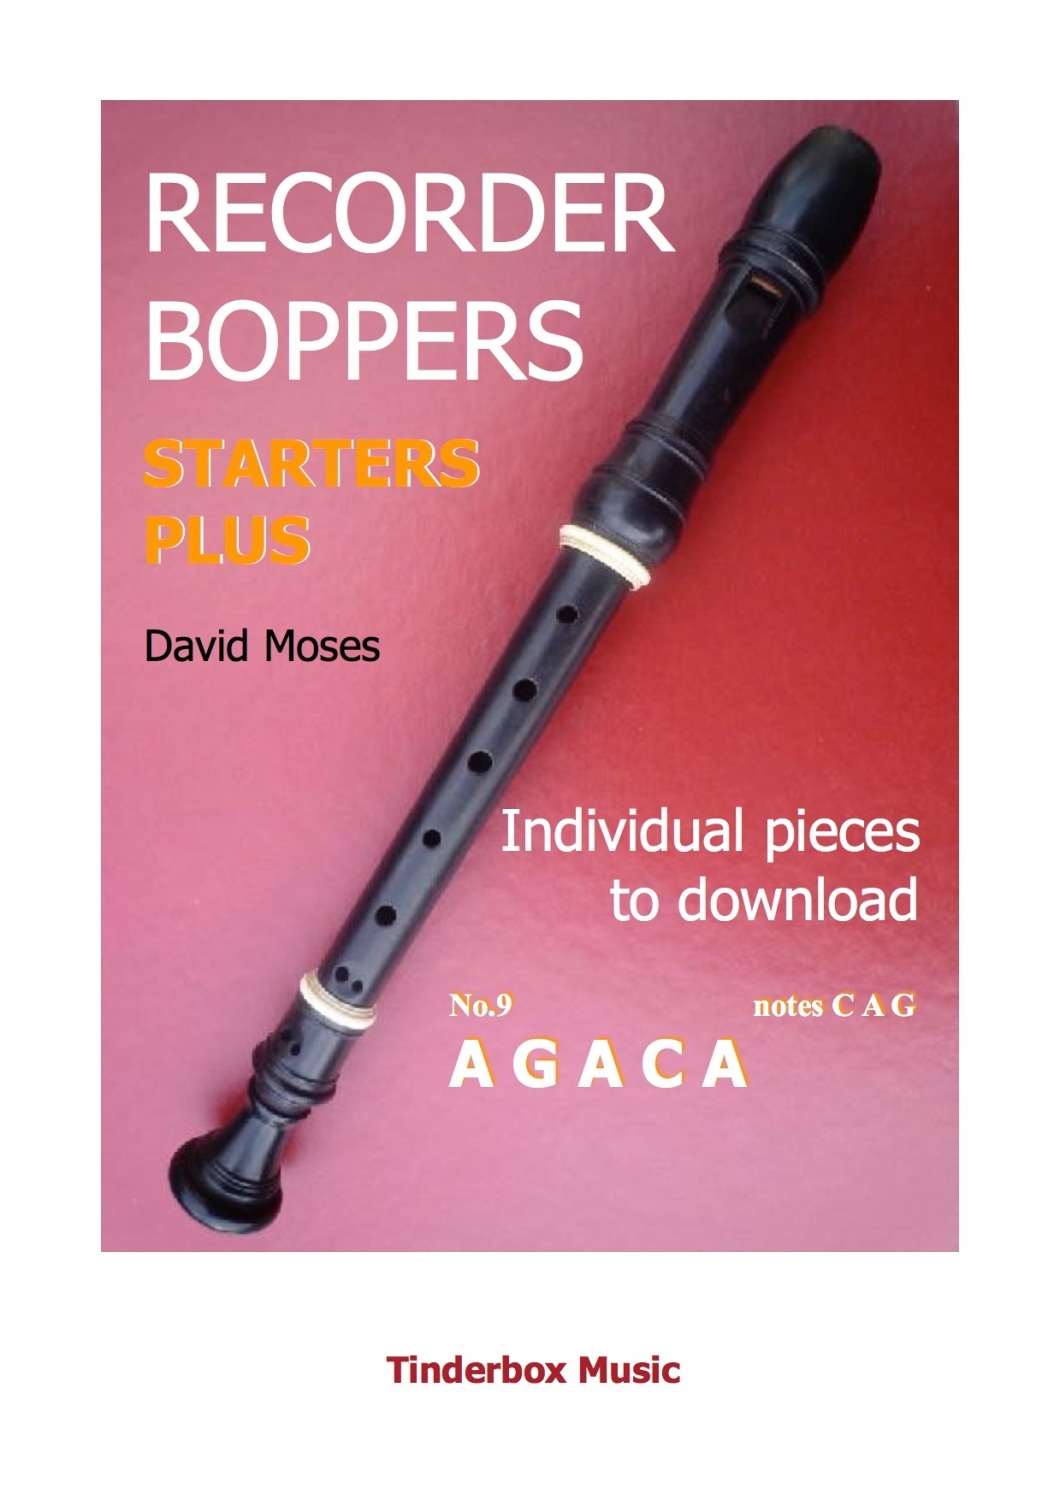 STARTERS PLUS individual pieces no.9  A G A C A  download